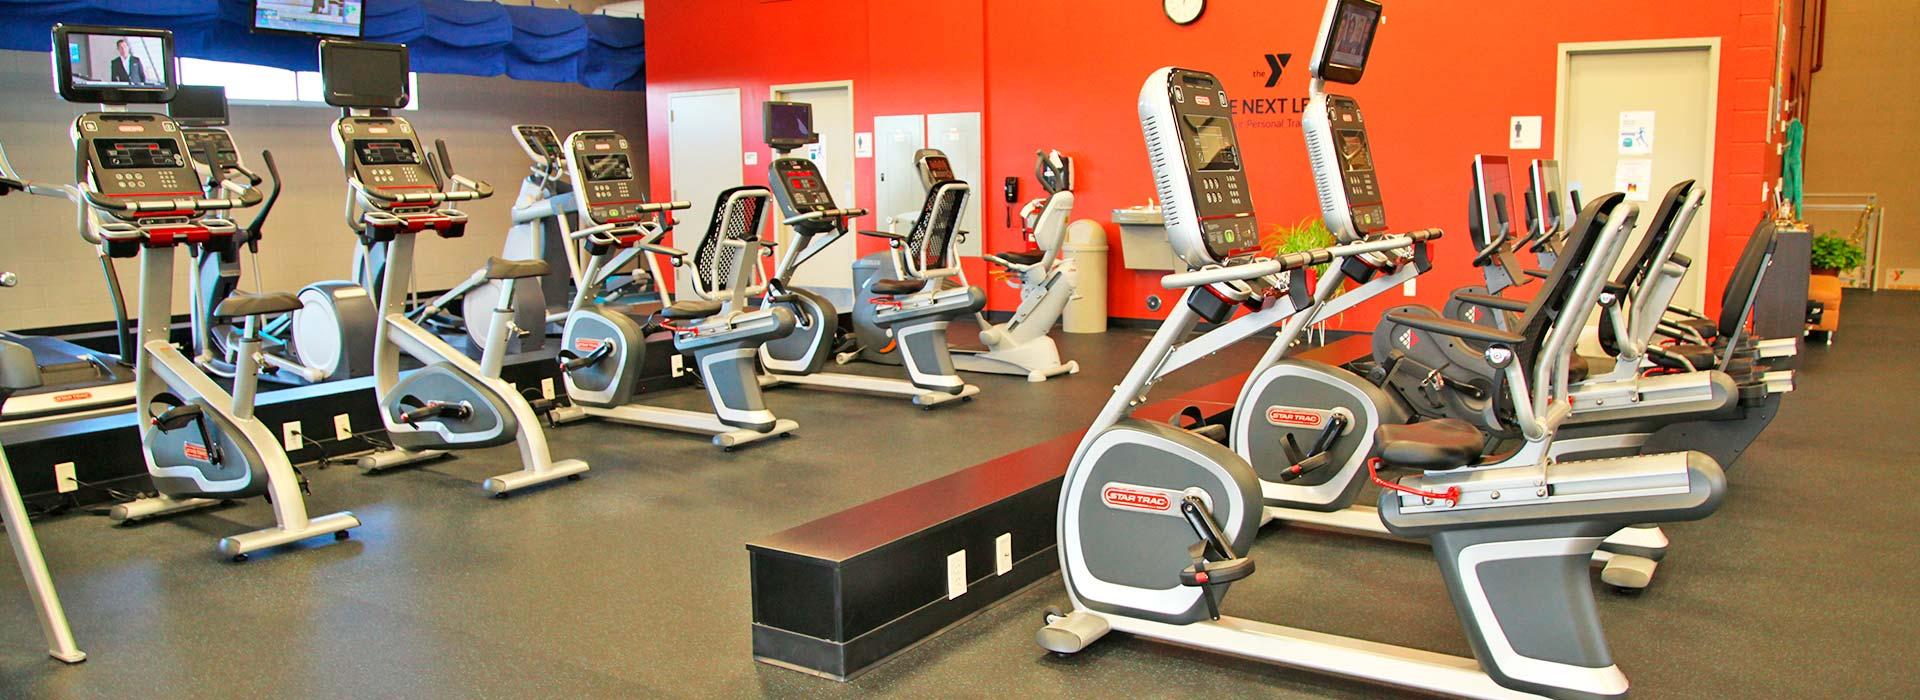 elliptical with screens